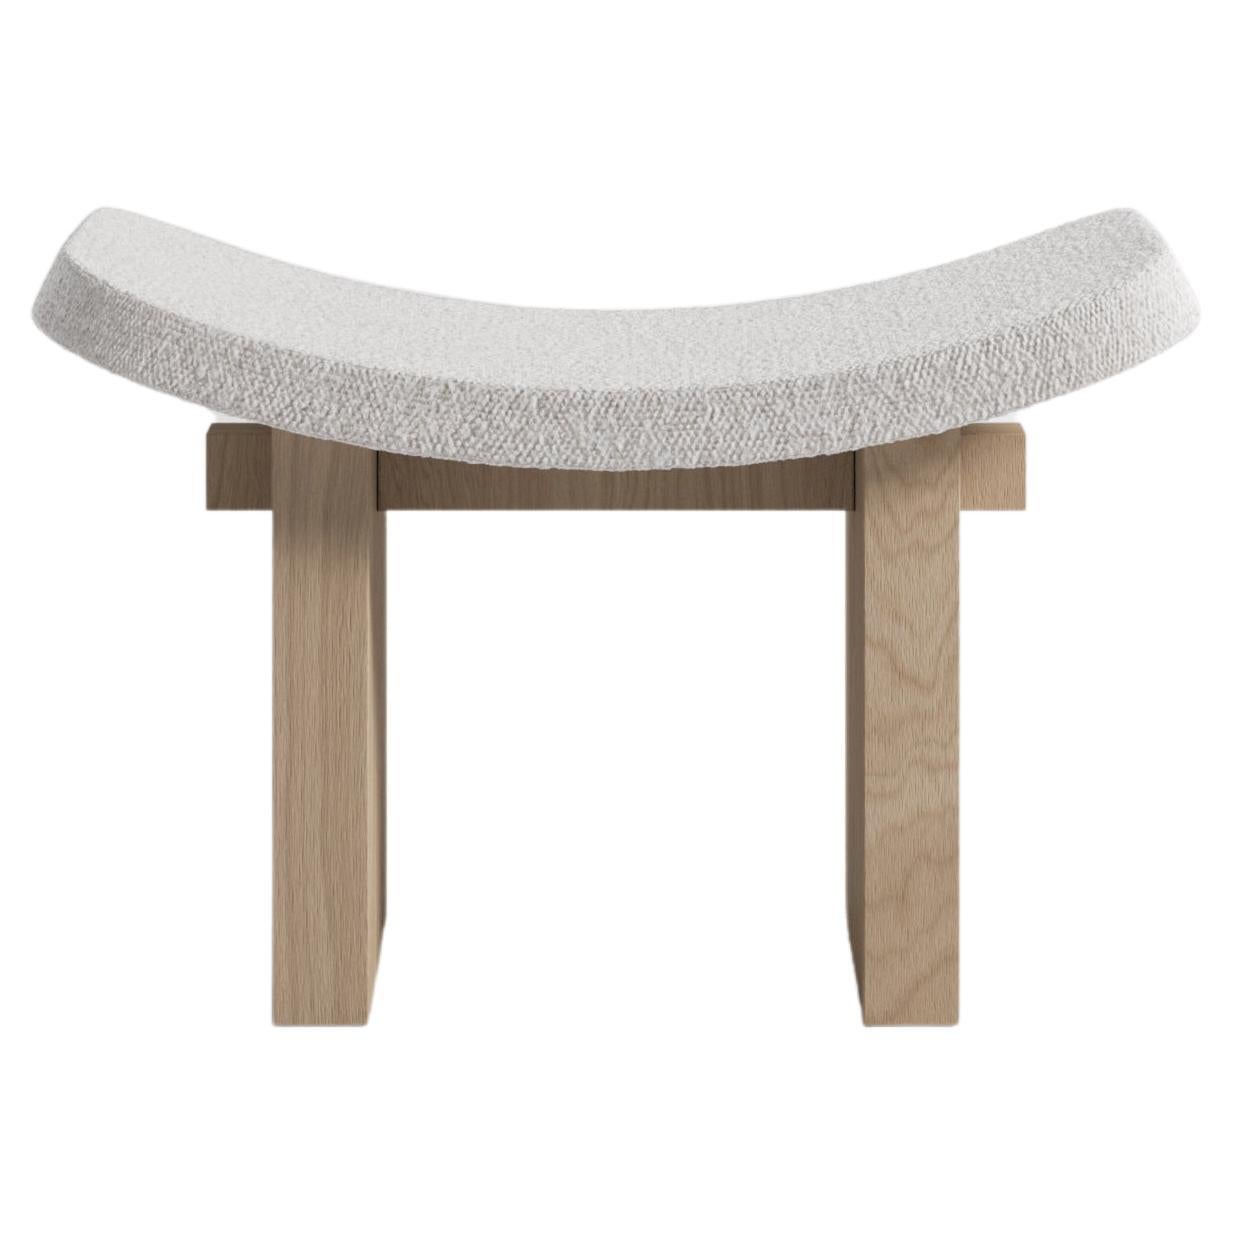 Nara Contemporary Stool in Fabric and Wood